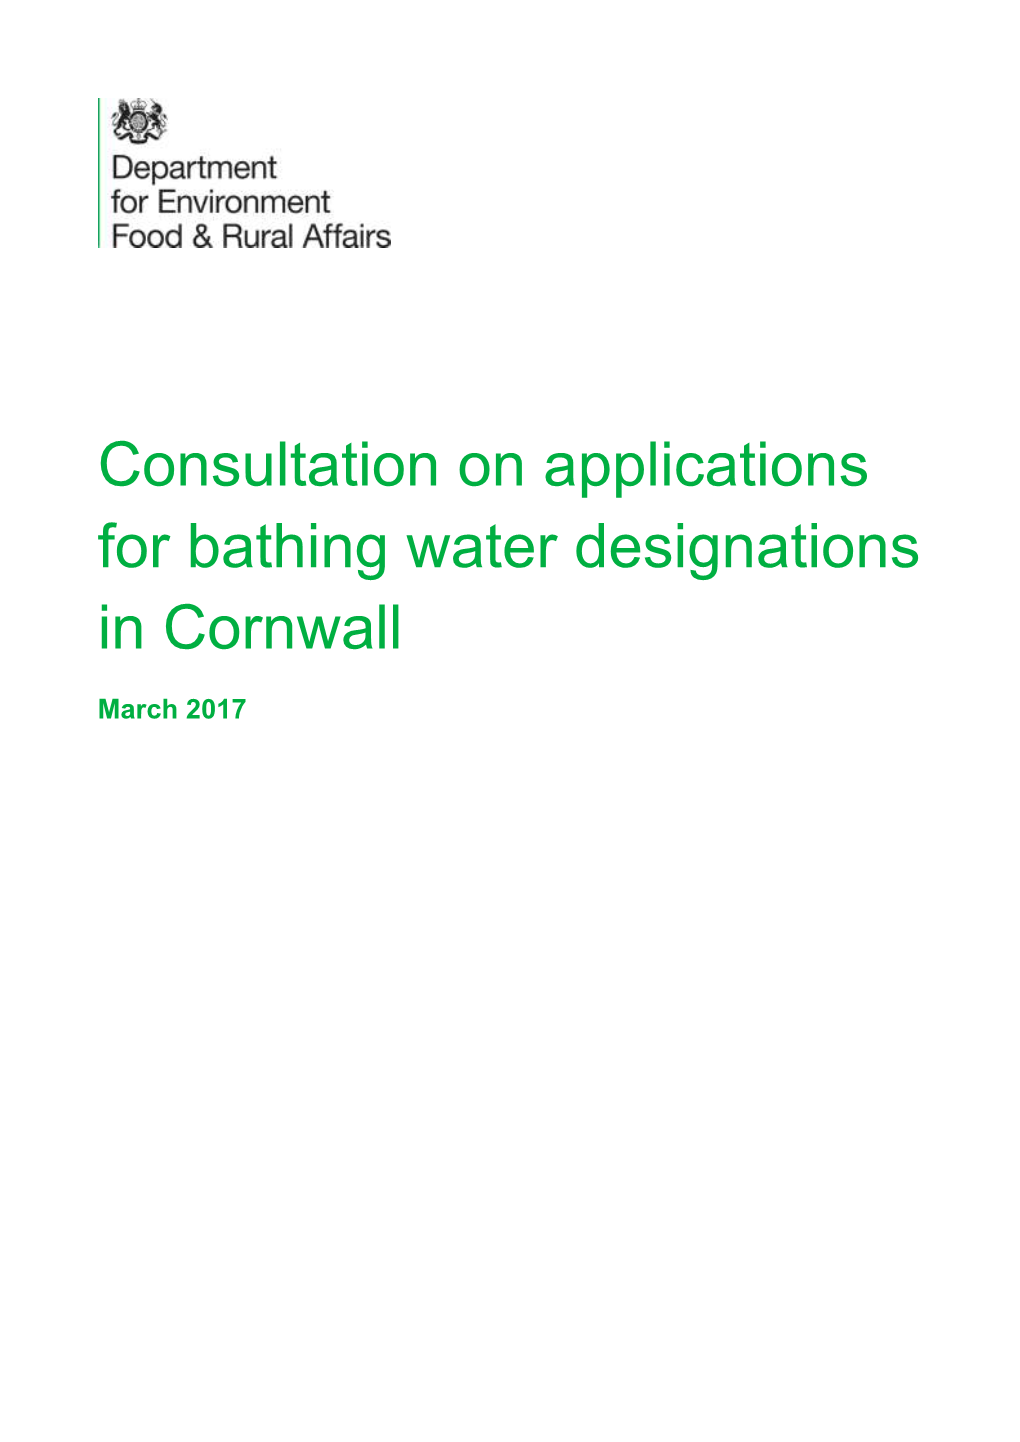 Consultation on Applications for Bathing Water Designations in Cornwall